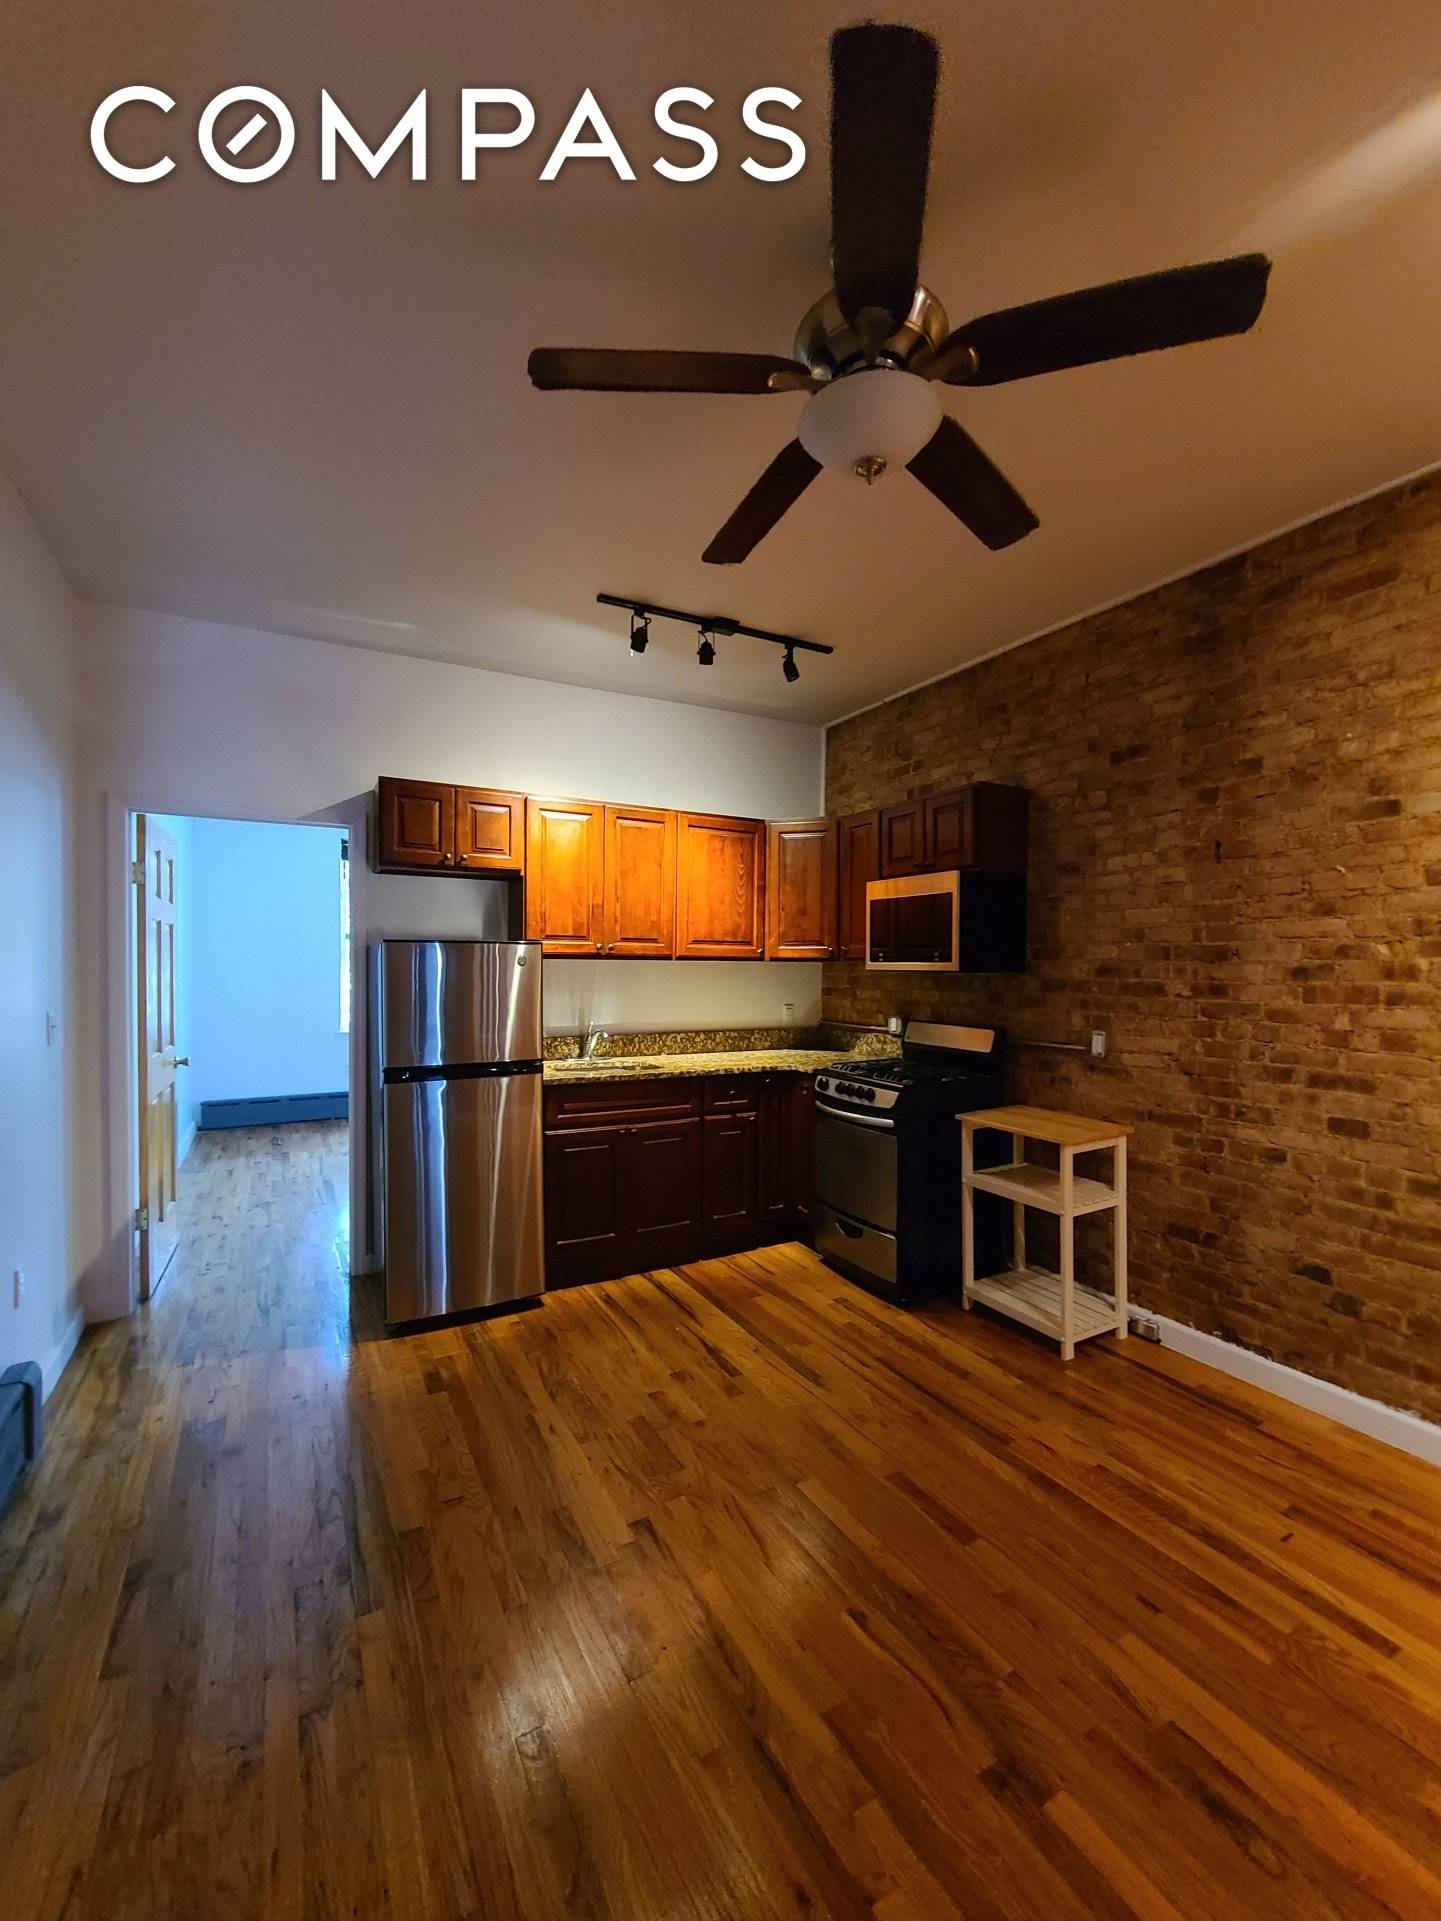 Located in bustling, prime Bushwick, this two bedroom apartment is available on the second floor of a six unit apartment building.